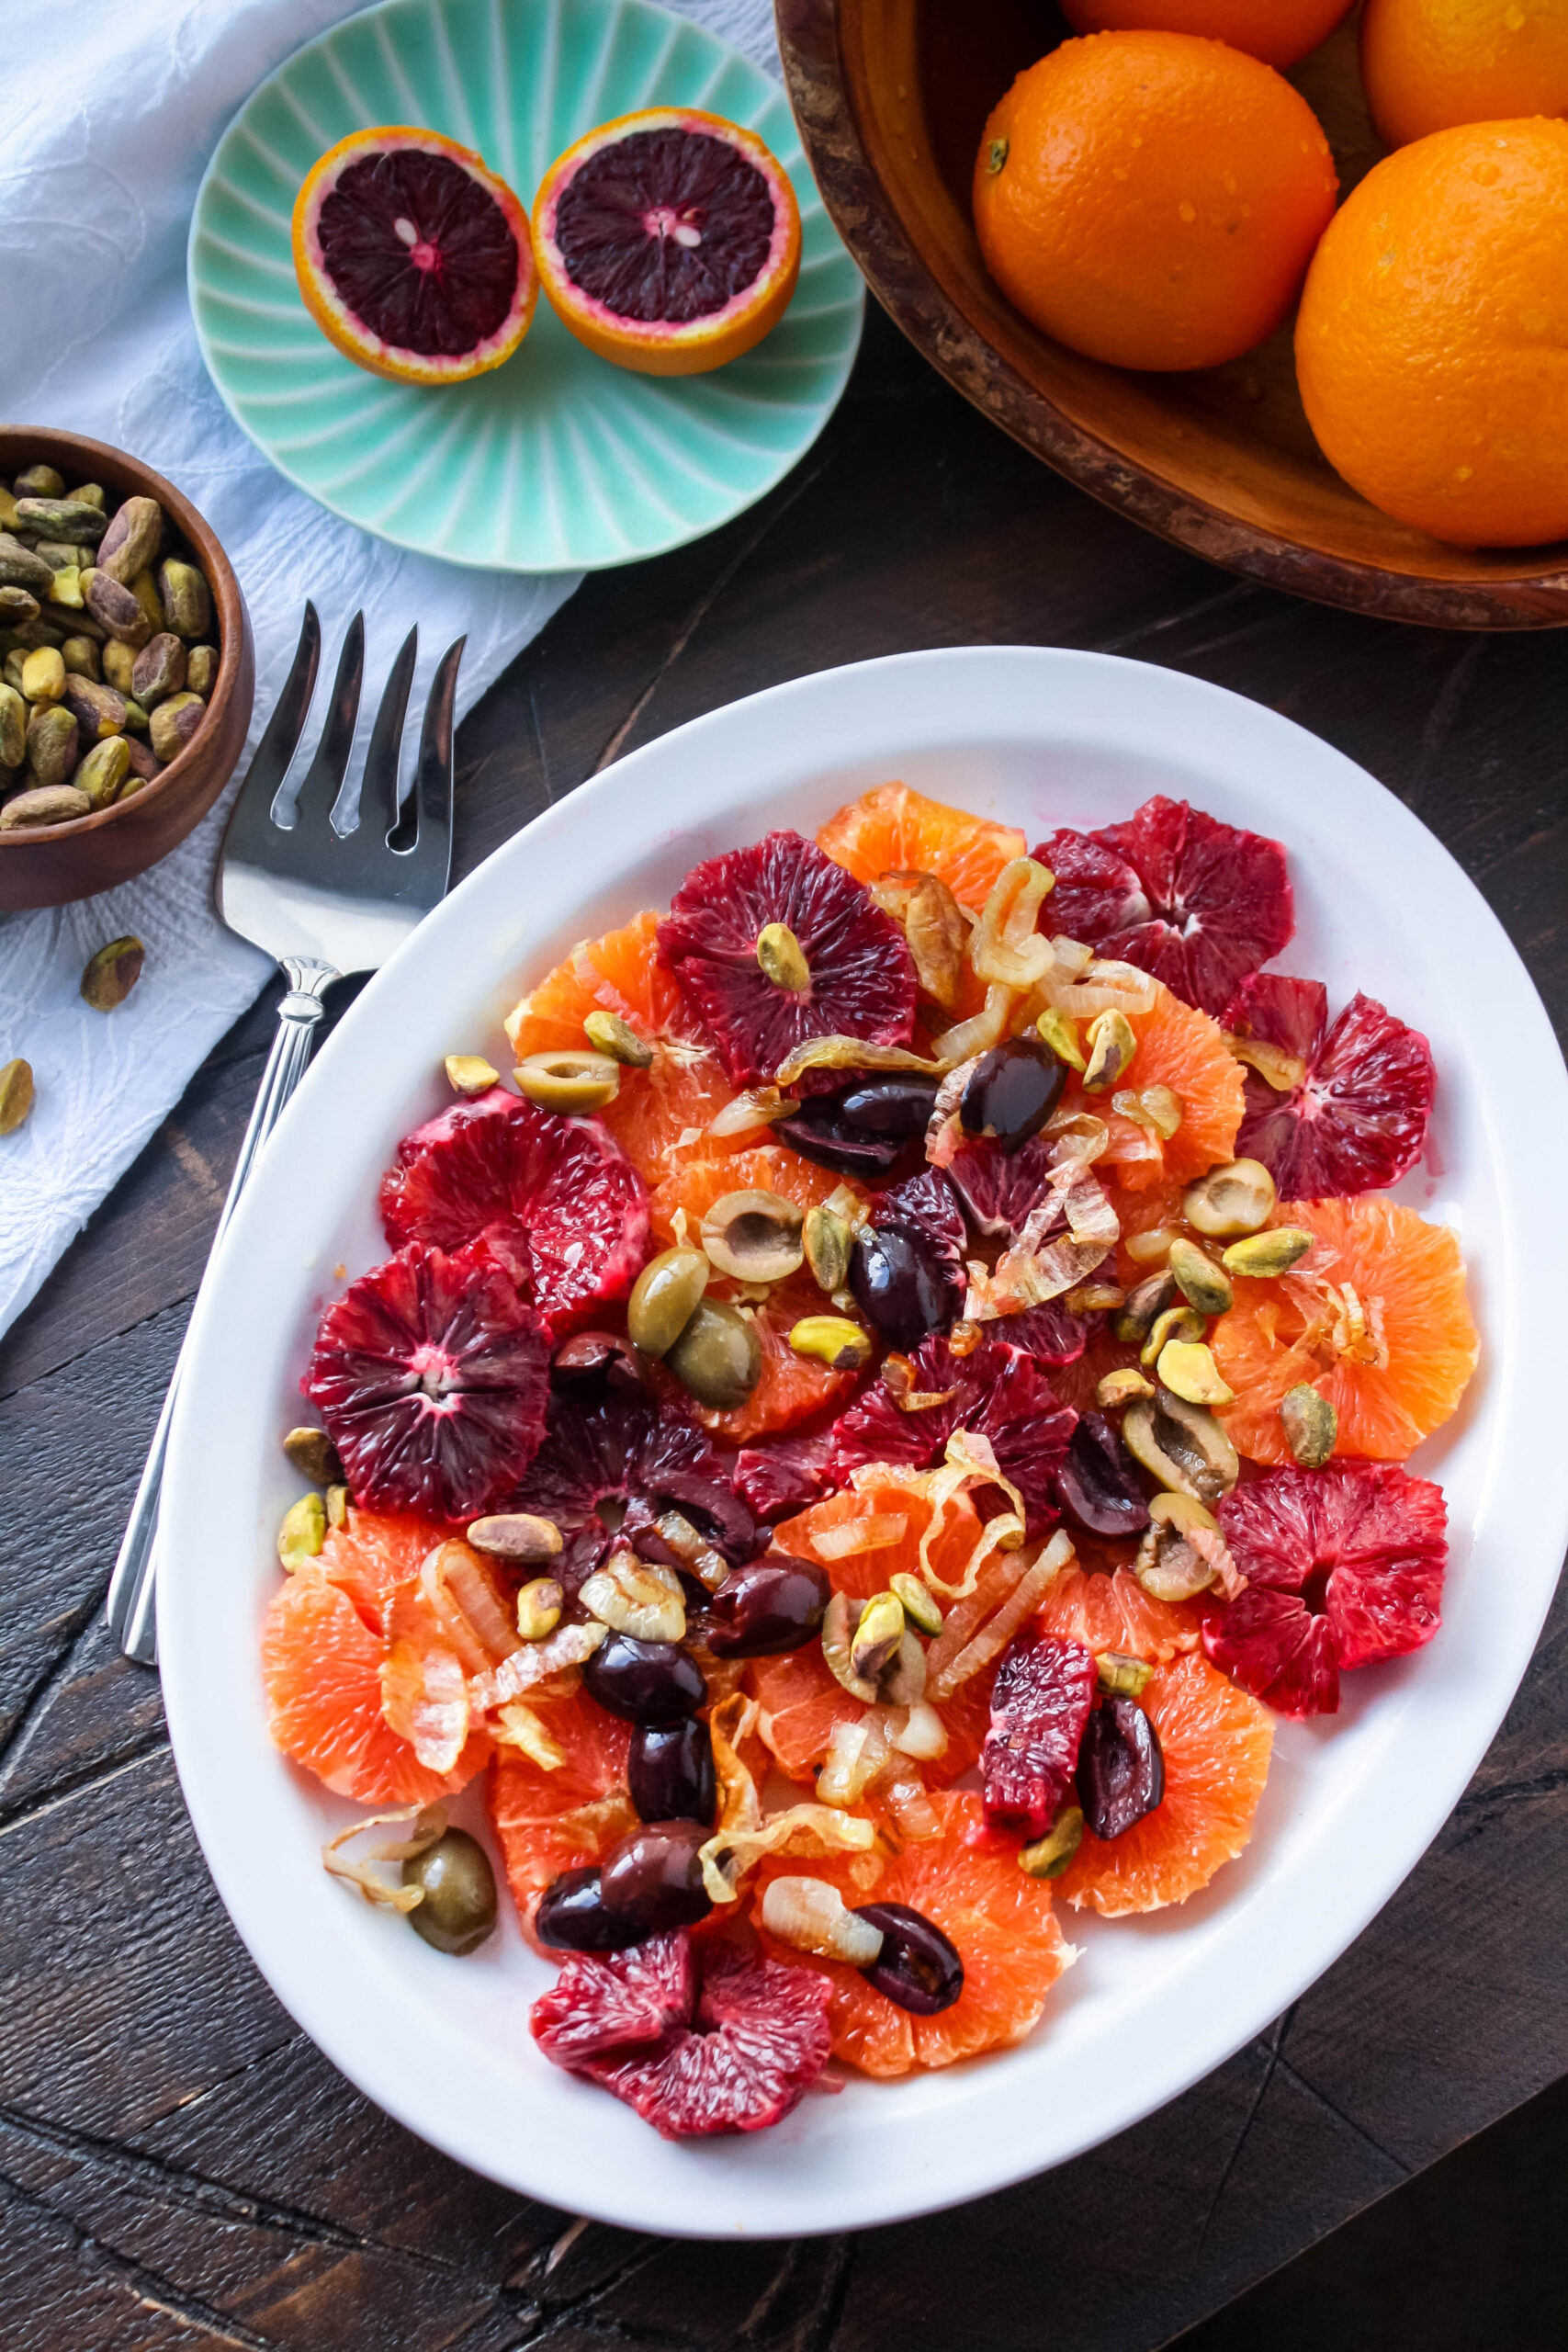 Serve Blood Orange Salad with Shallots & Olives to present a pretty salad for your next special meal.